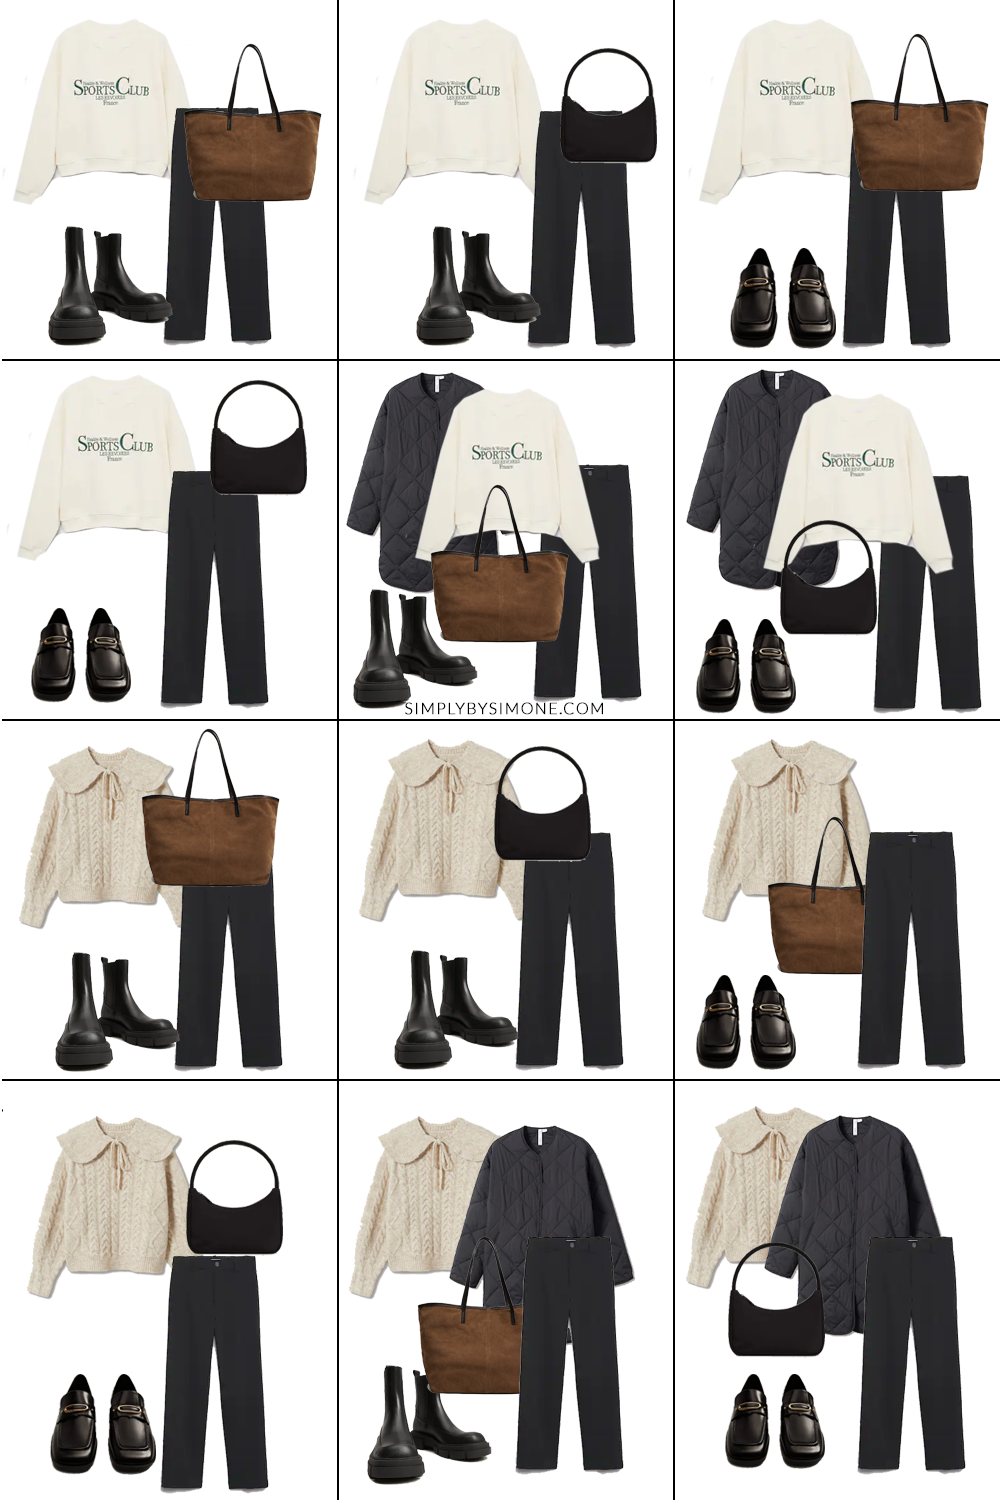 Mango Fall Capsule Wardrobe Items | 12 Pieces, 48 Outfits | How to Build a Capsule Wardrobe | Mango Clothing Fall Clothes | Outfit Inspiration | 48 Fall Weather Outfit Ideas | Fall Vacation Packing Guide | Mango Clothing Fall Capsule Wardrobe| What To Wear this Fall 2021 | Simply by Simone | Mango Fall Capsule Wardrobe | What To Wear This Fall 2021 | Looks 13 - 24